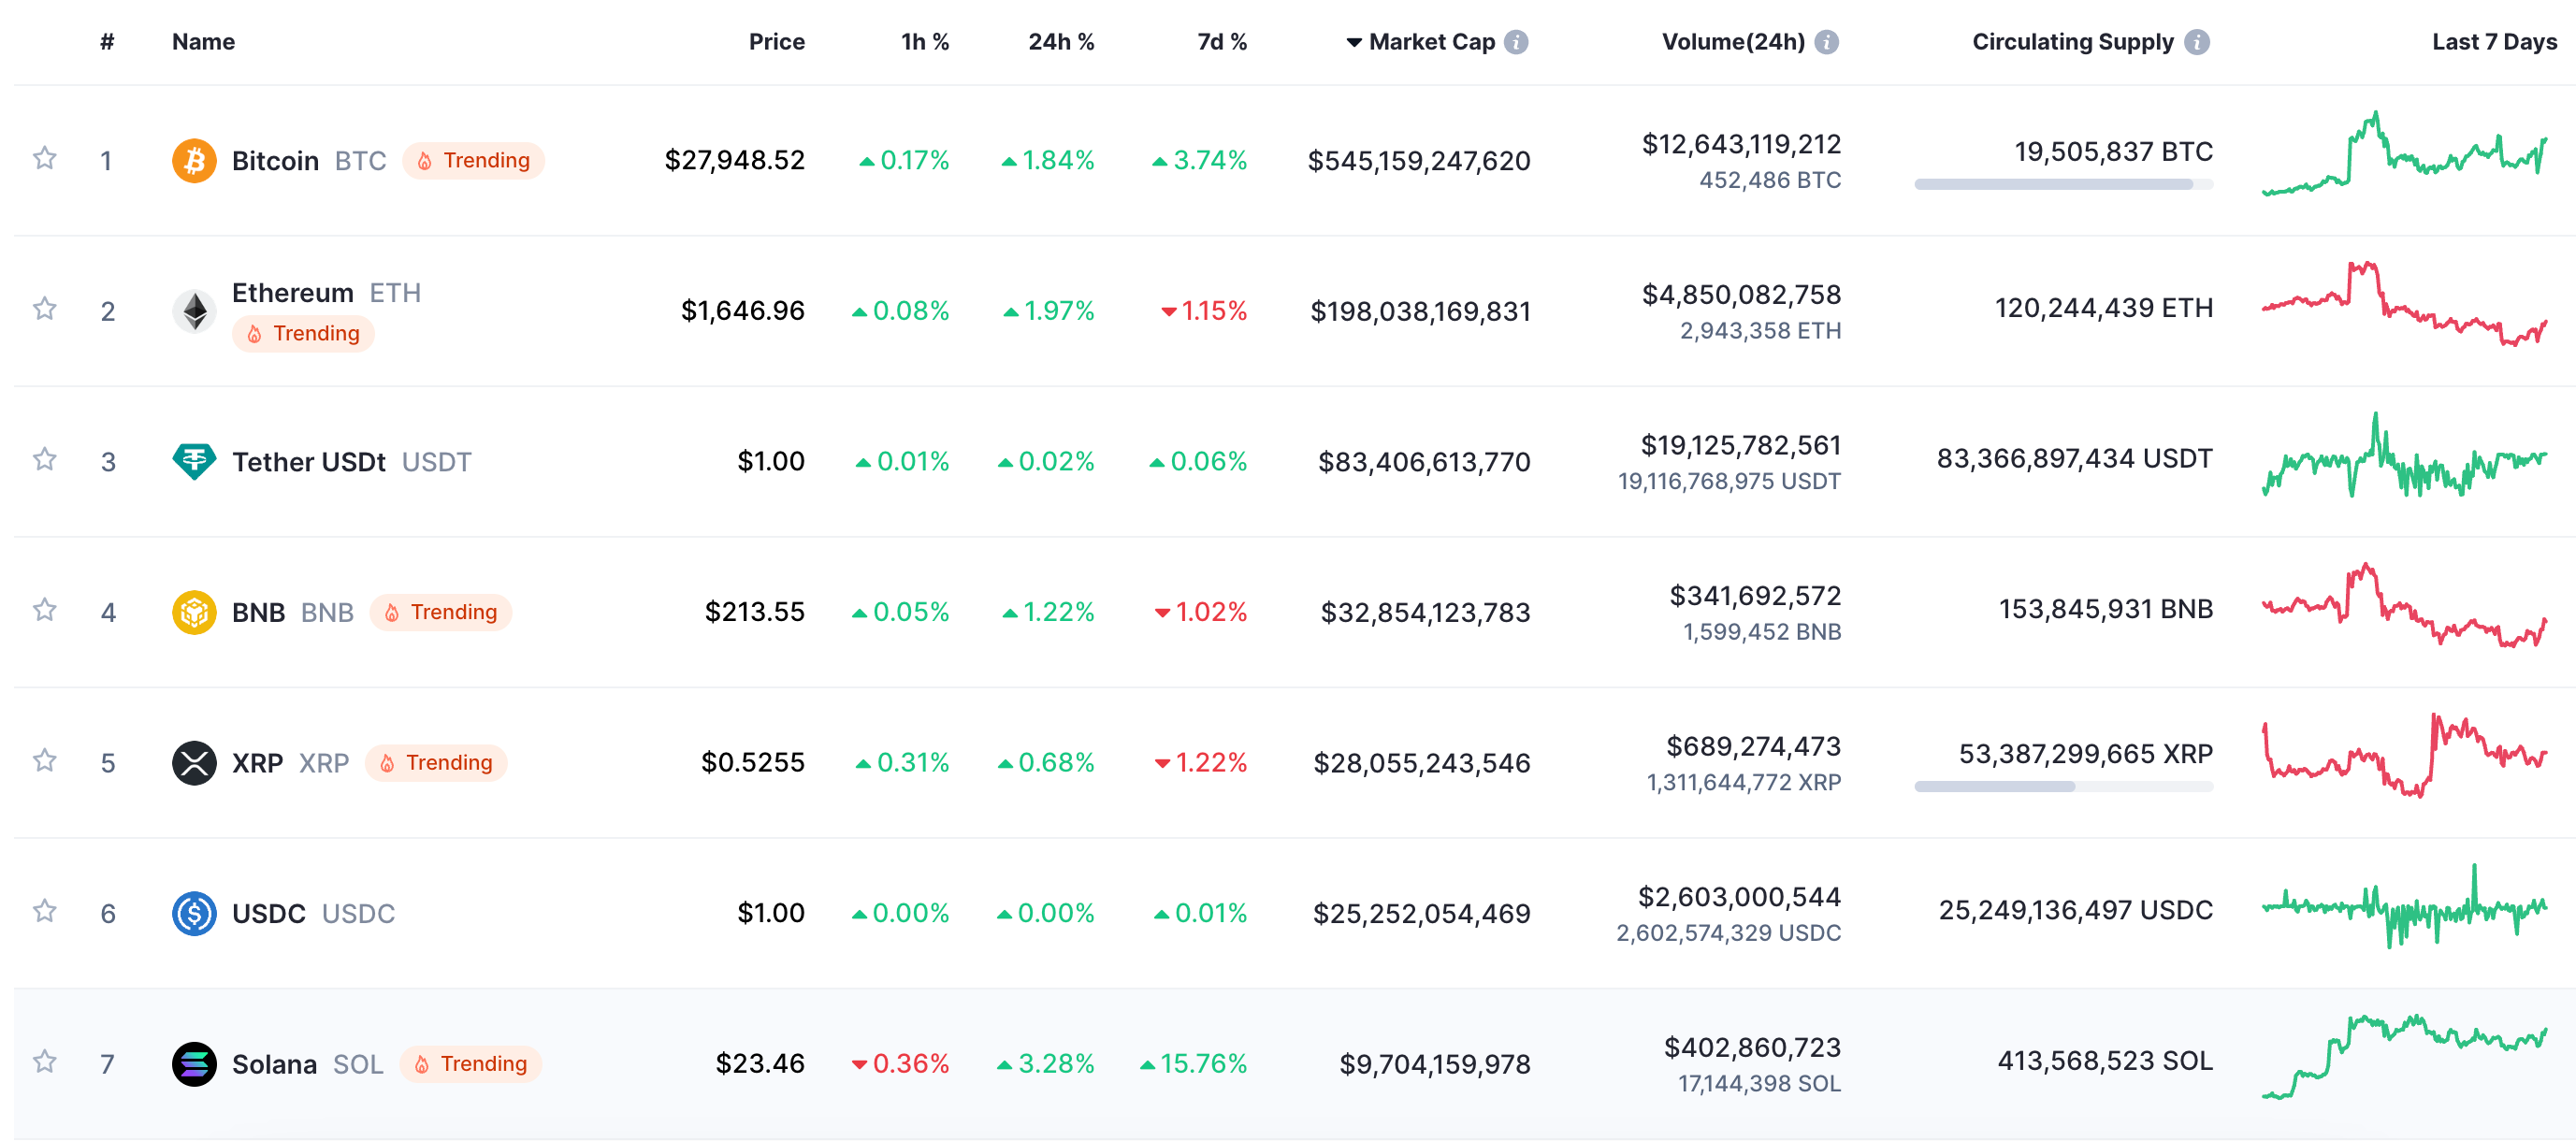 A screenshot of the largest cap cryptocurrencies on CoinMarketCap